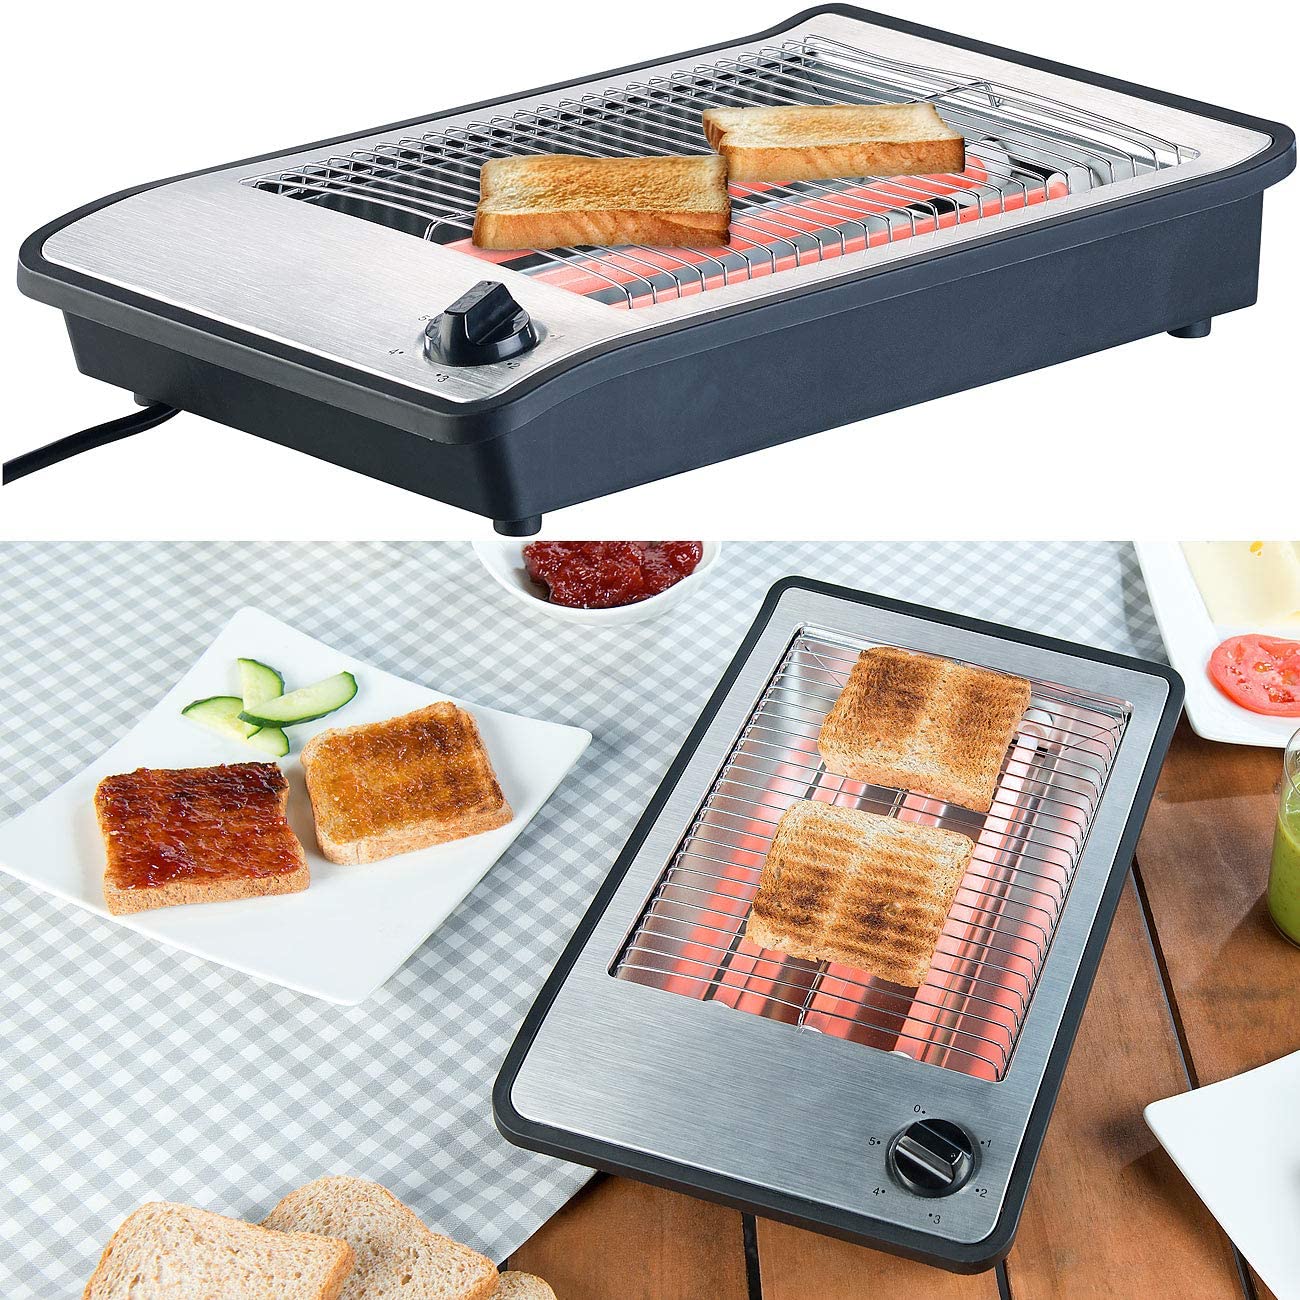 Rosenstein & Söhne Bread Toaster: Flat Toaster For Up To 4 Rolls, 3 Heating